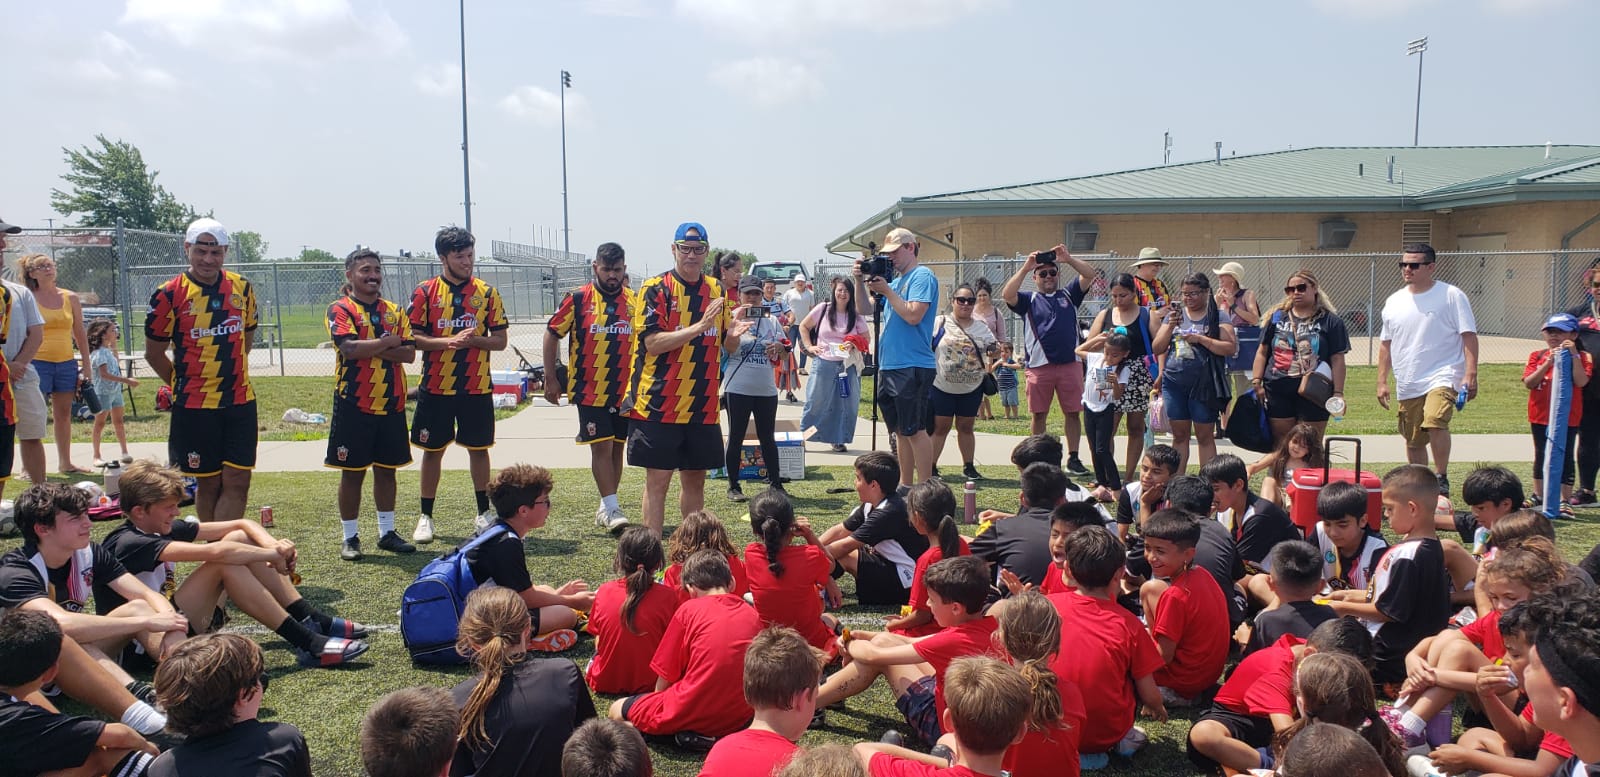 Antonio Soave and Other Coaches at the Soccer Camp on June 24th in KC